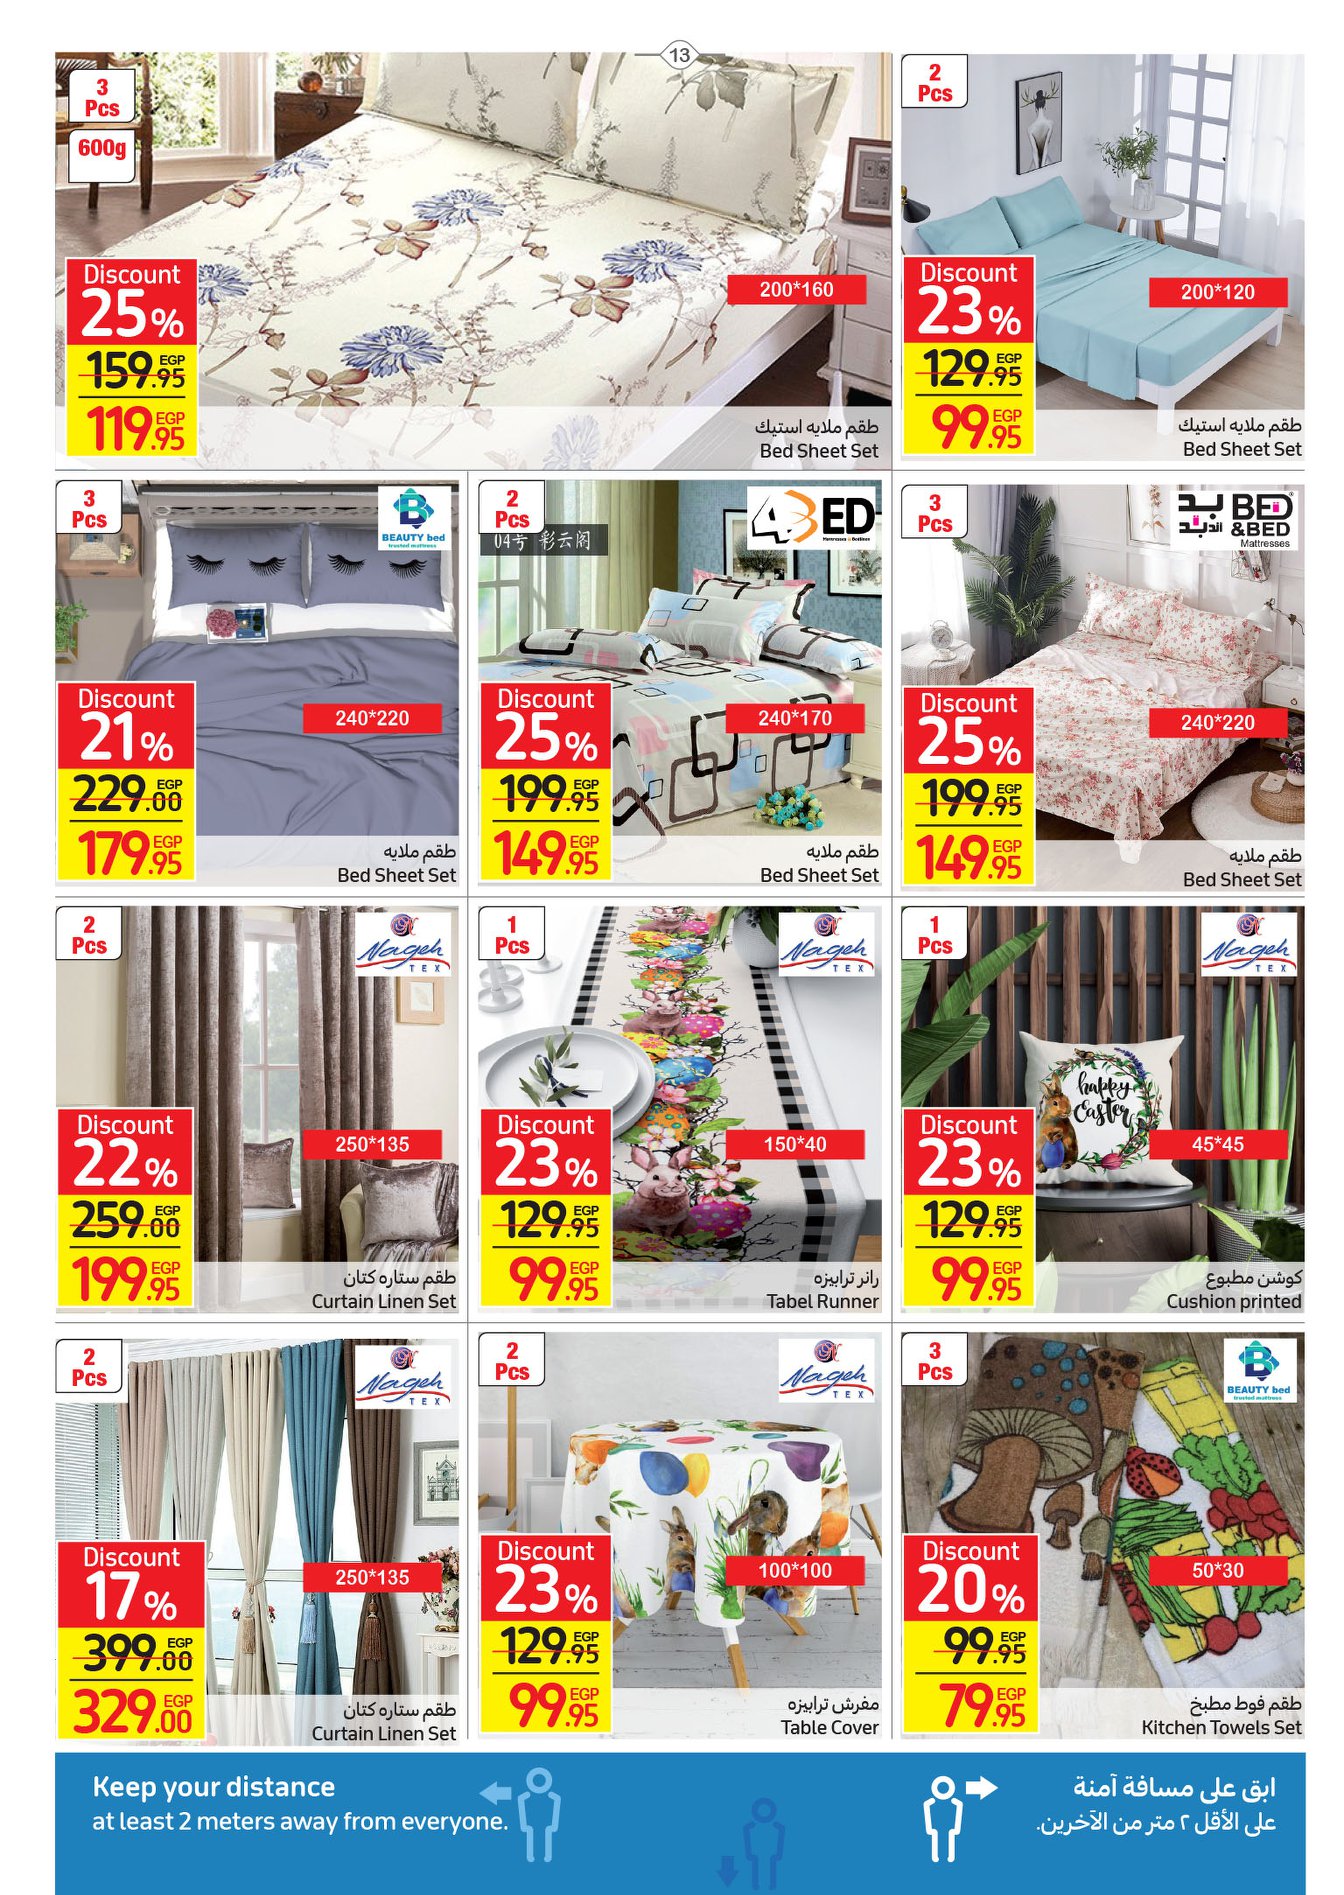 Enjoy now the strongest Carrefour offers from April 17-25, 2022.. Huge discounts on home essentials 12